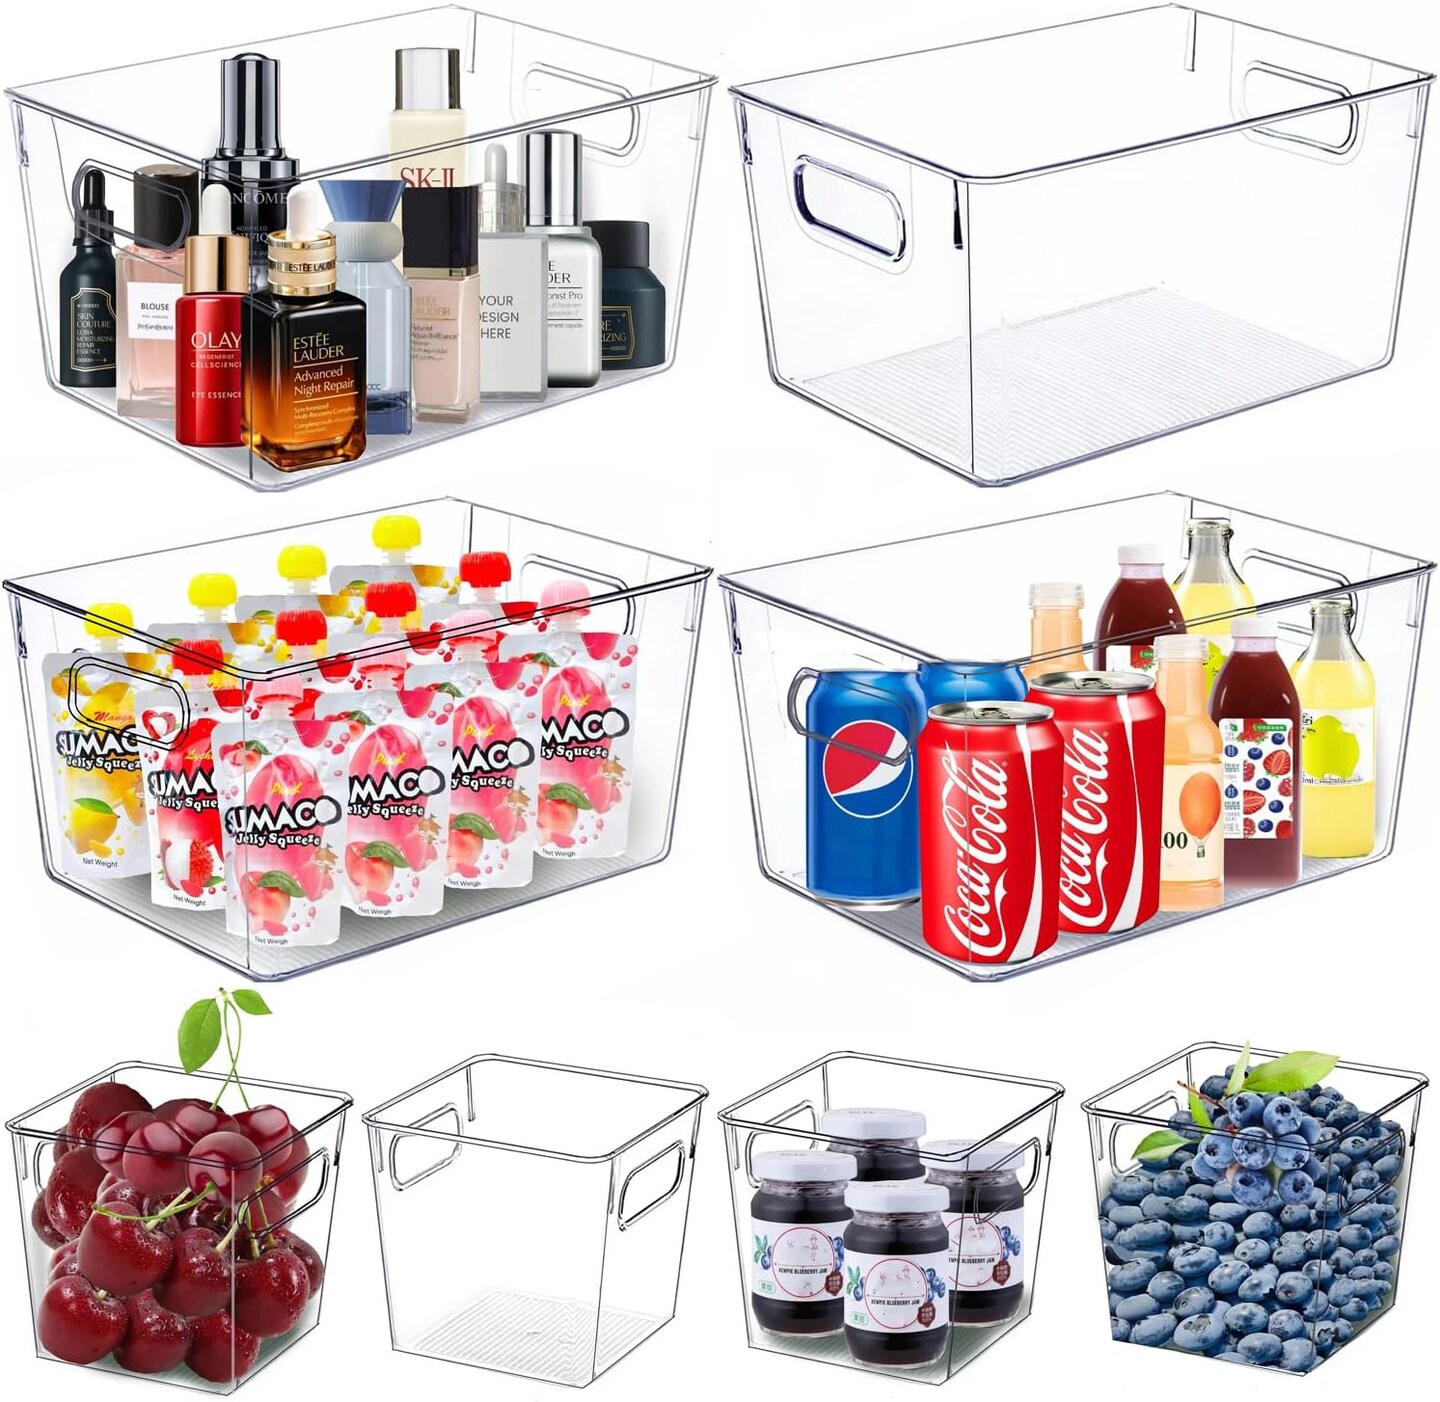  8 Pack Plastic Storage Baskets, Small Pantry Baskets